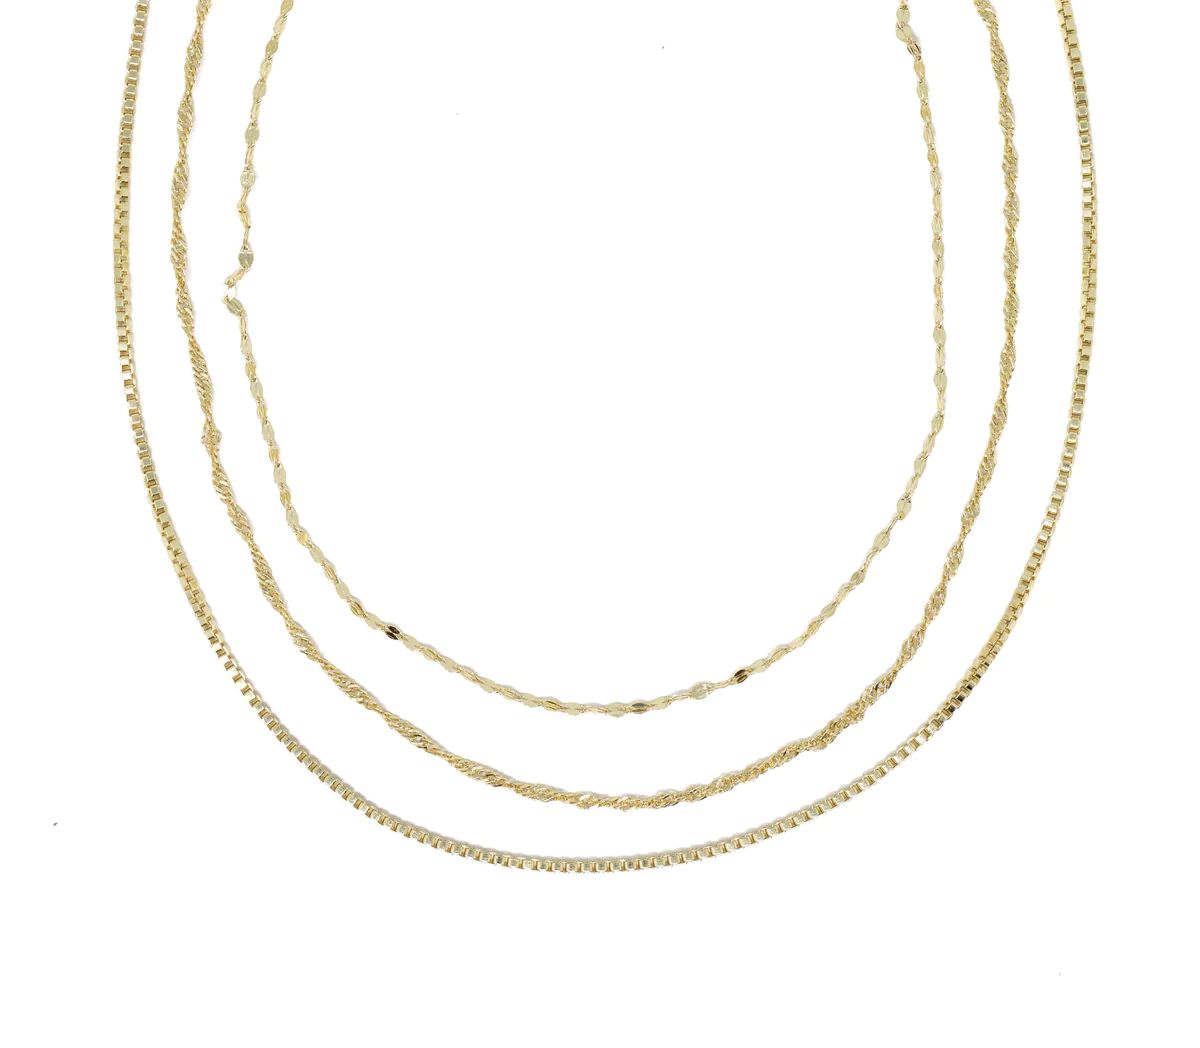 At Ease Necklace Stack | Allie + Bess